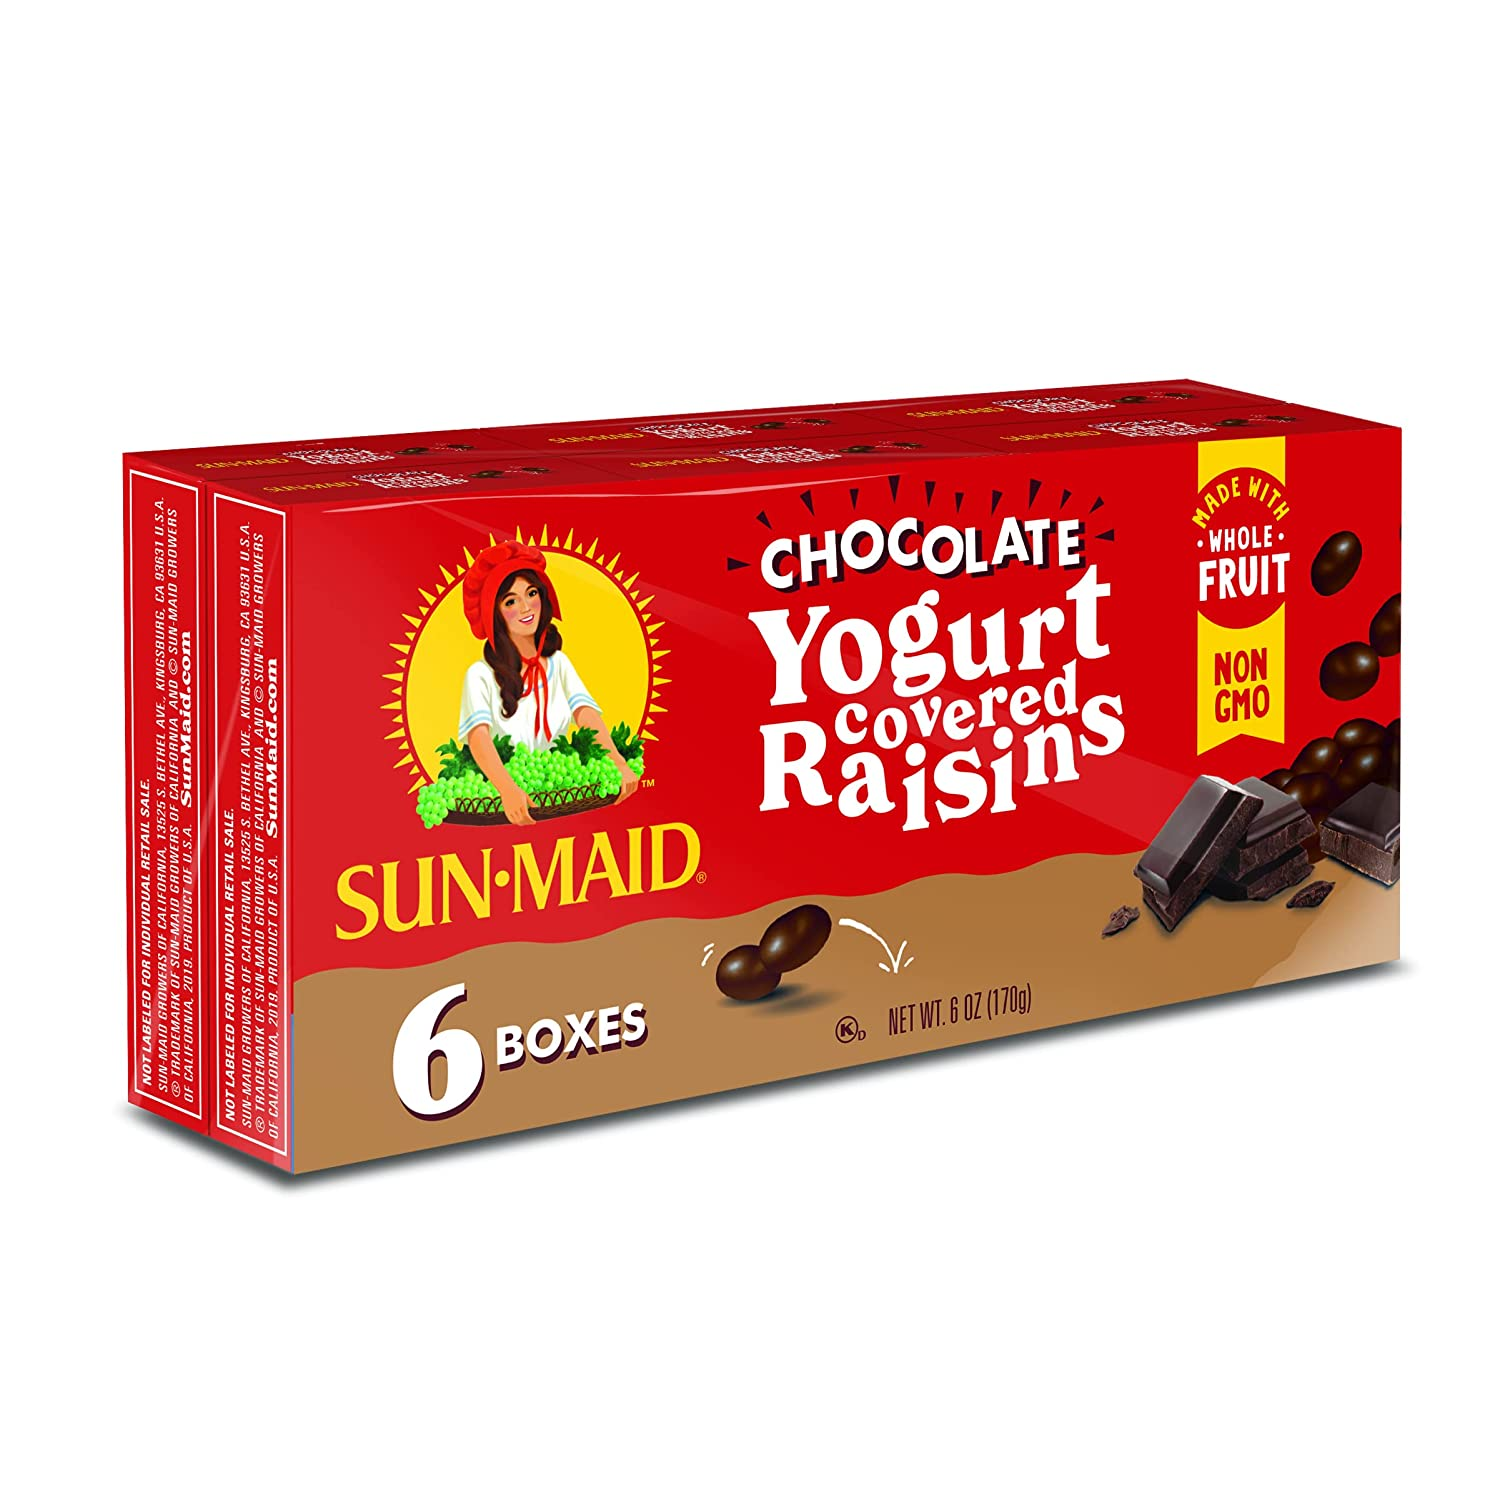 Sun-Maid California Raisin and Chocolate Yogurt Covered Raisin Variety Pack | 1 Ounce Boxes | 6 Count | Pack of 6 |Whole Dried Fruit Snacks| No Artificial Flavors | Non-Gmo